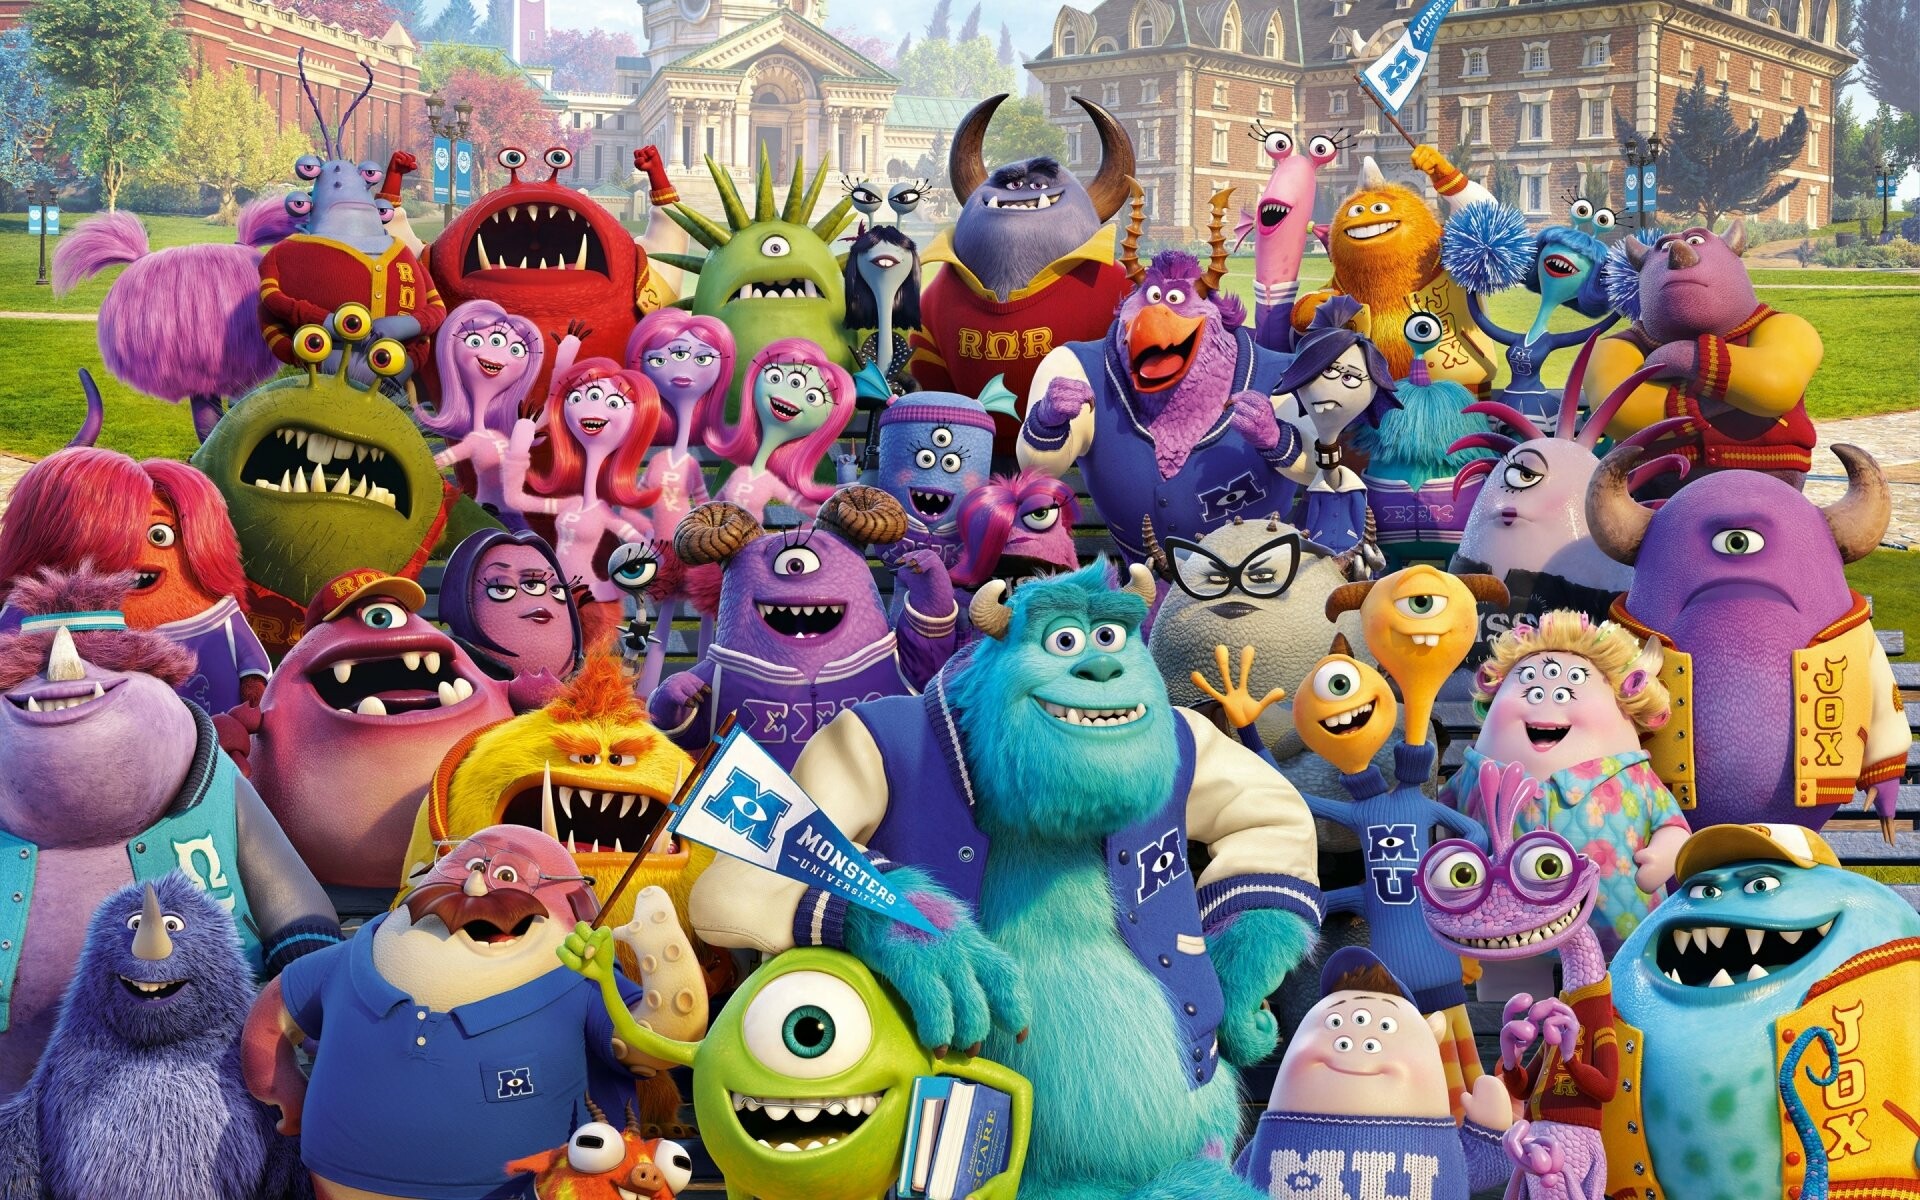 Monsters, Inc.: An animated adventure in which monsters need to collect children's screams to power their world. 1920x1200 HD Background.